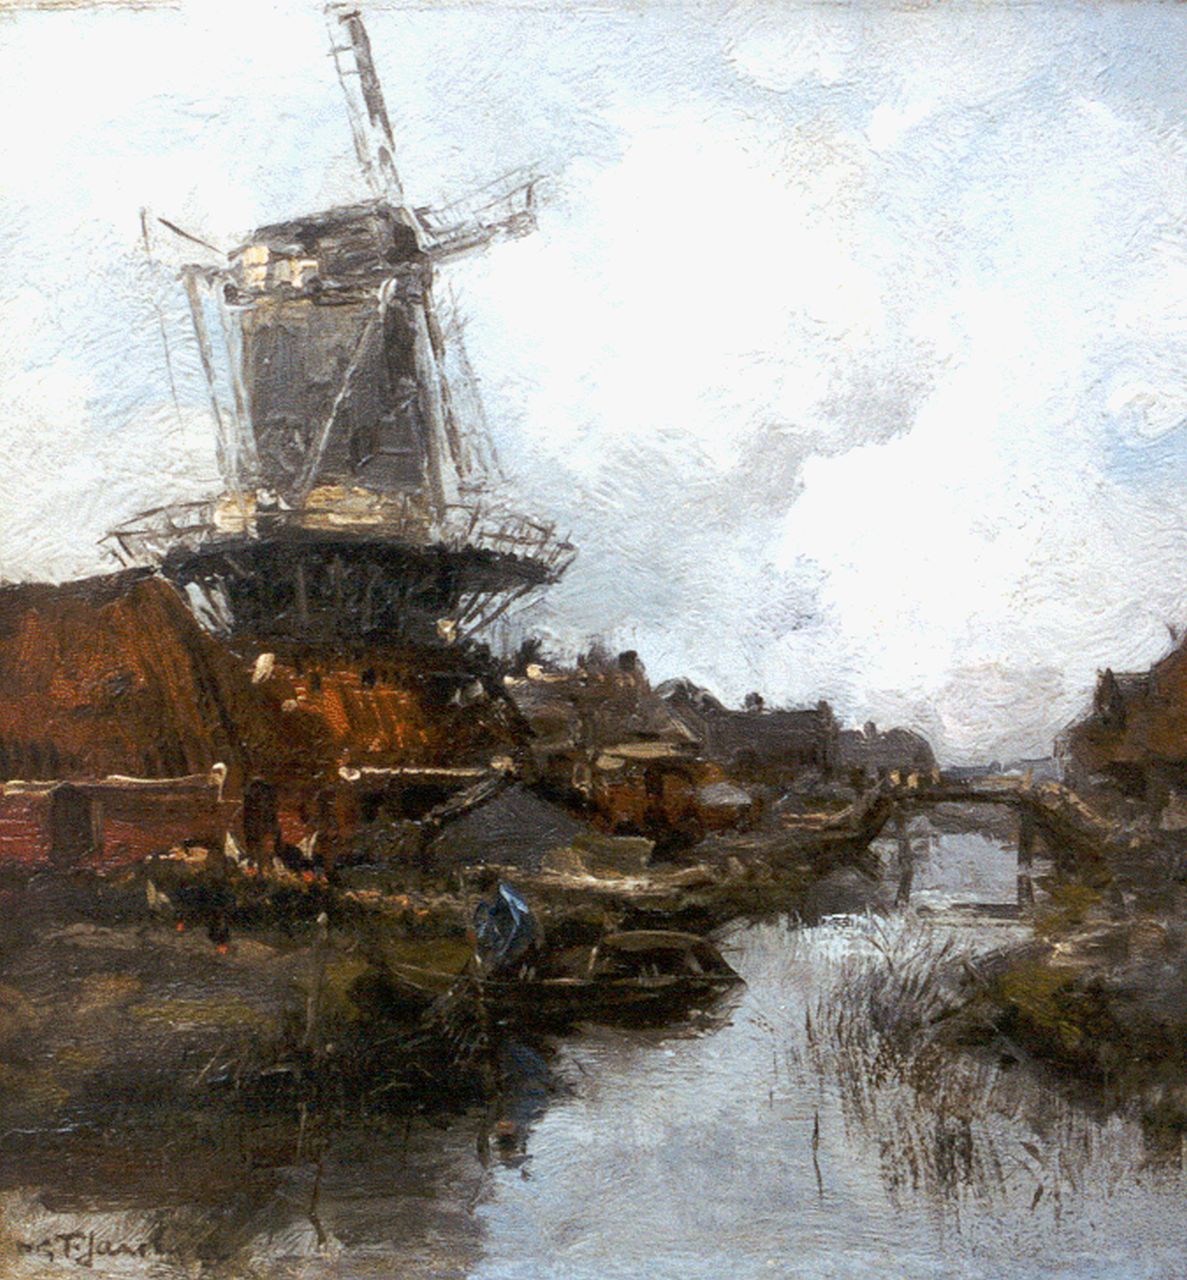 Jansen W.G.F.  | 'Willem' George Frederik Jansen, A windmill in a river landscape, oil on canvas 31.3 x 29.6 cm, signed l.l. and dated '22